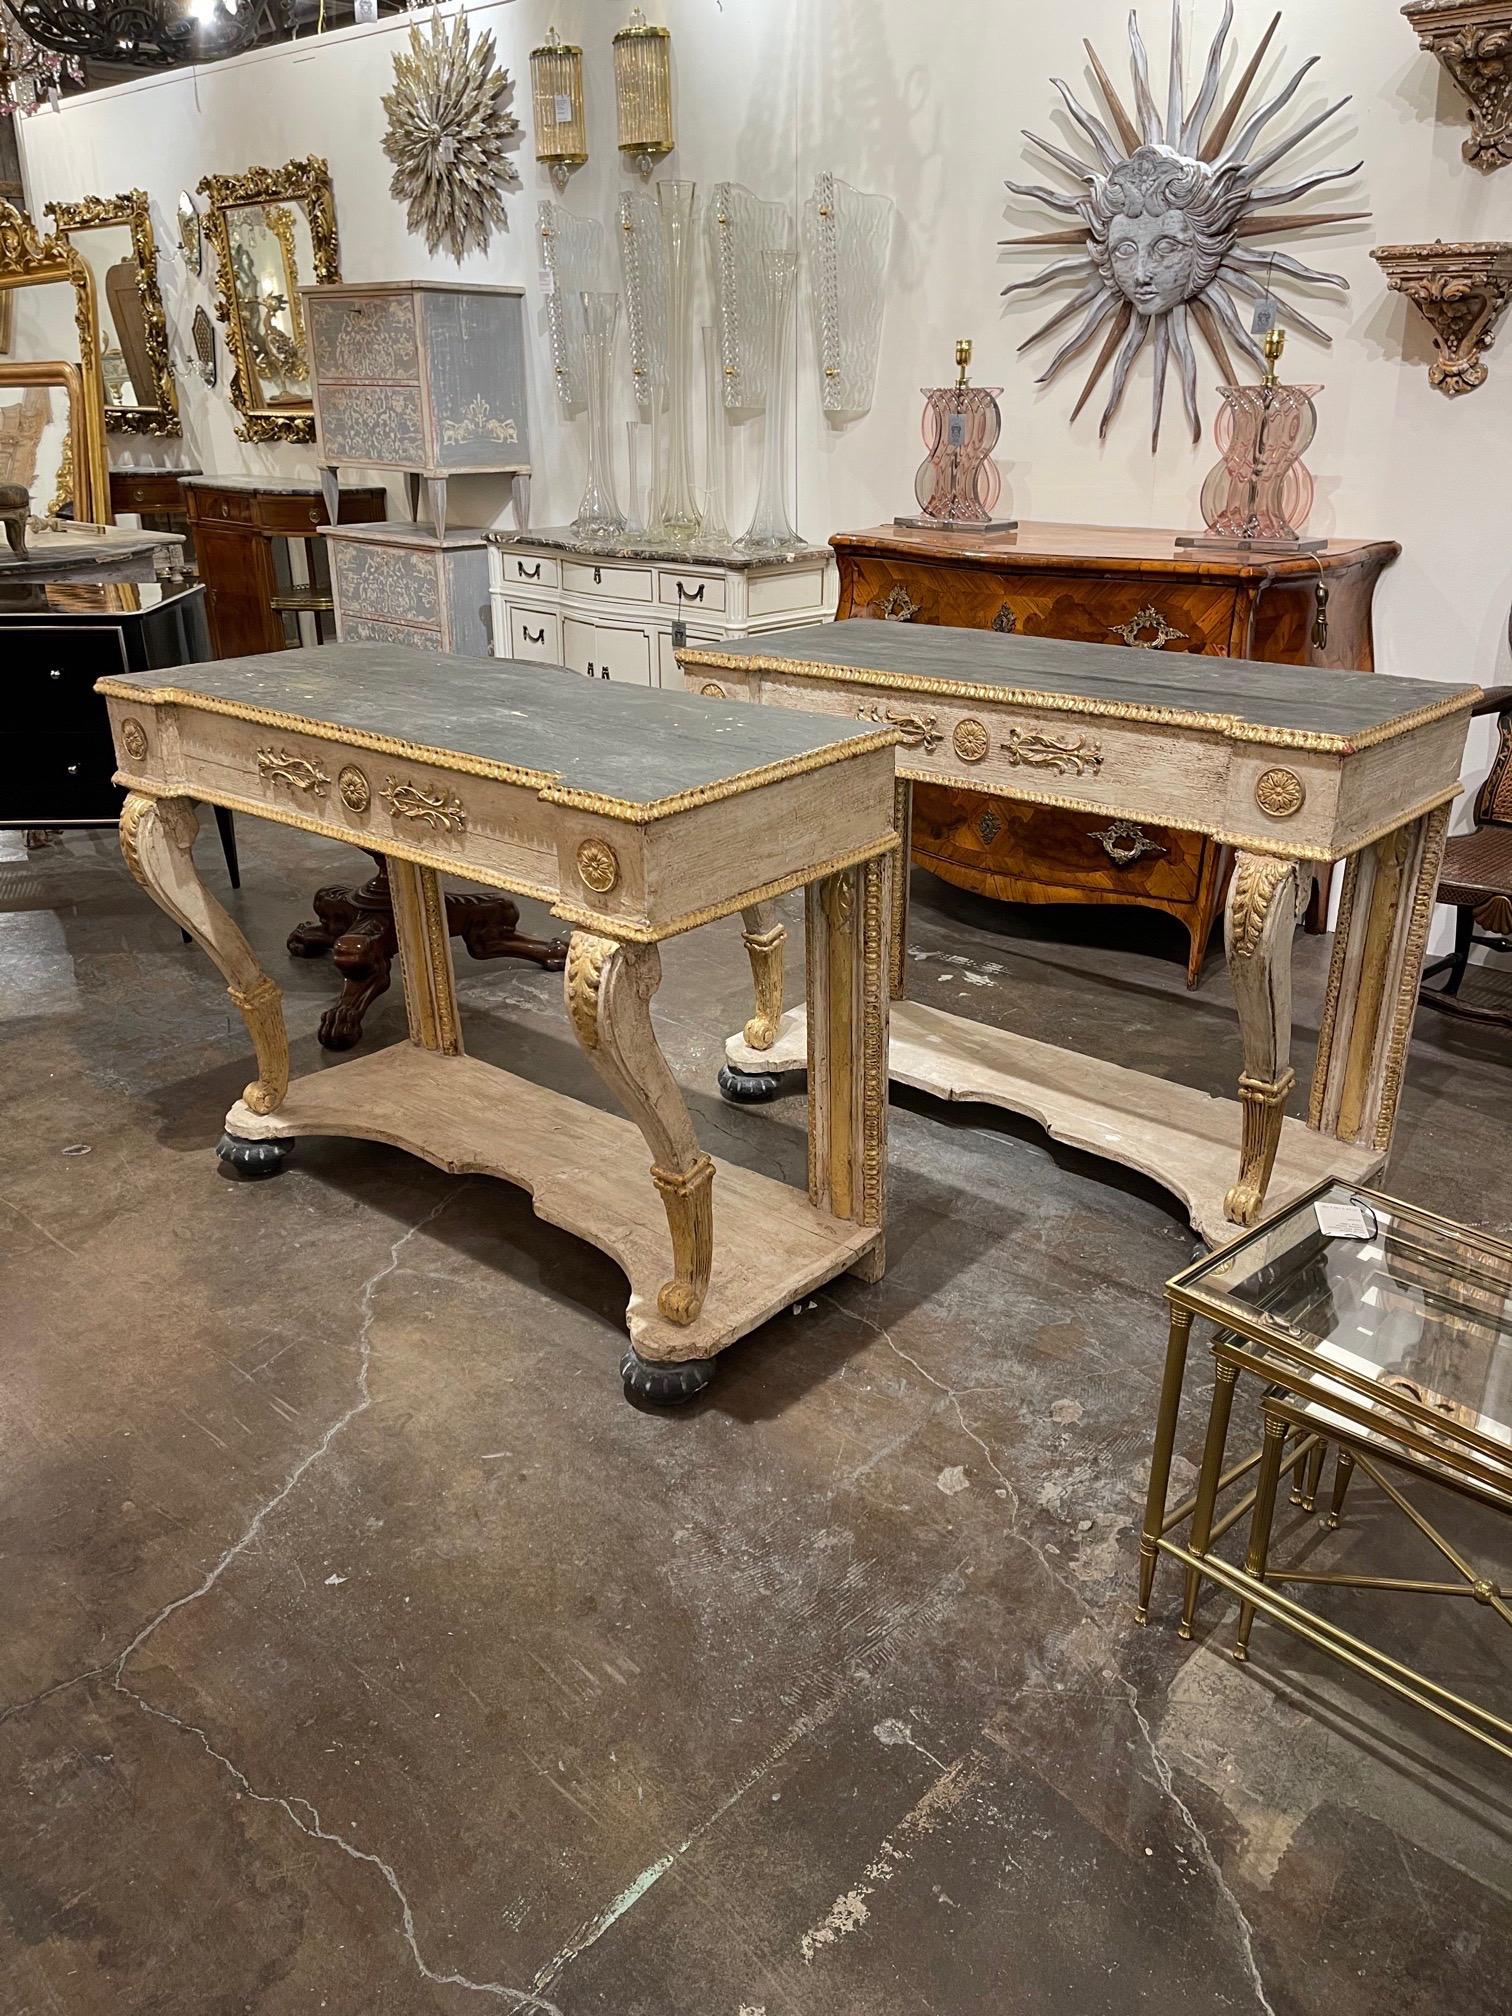 Beautiful Italian carved and parcel-gilt consoles. Nice patina in colors of creme, black and gold along with pretty carvings. Lovely!! Note: Price listed is per item.